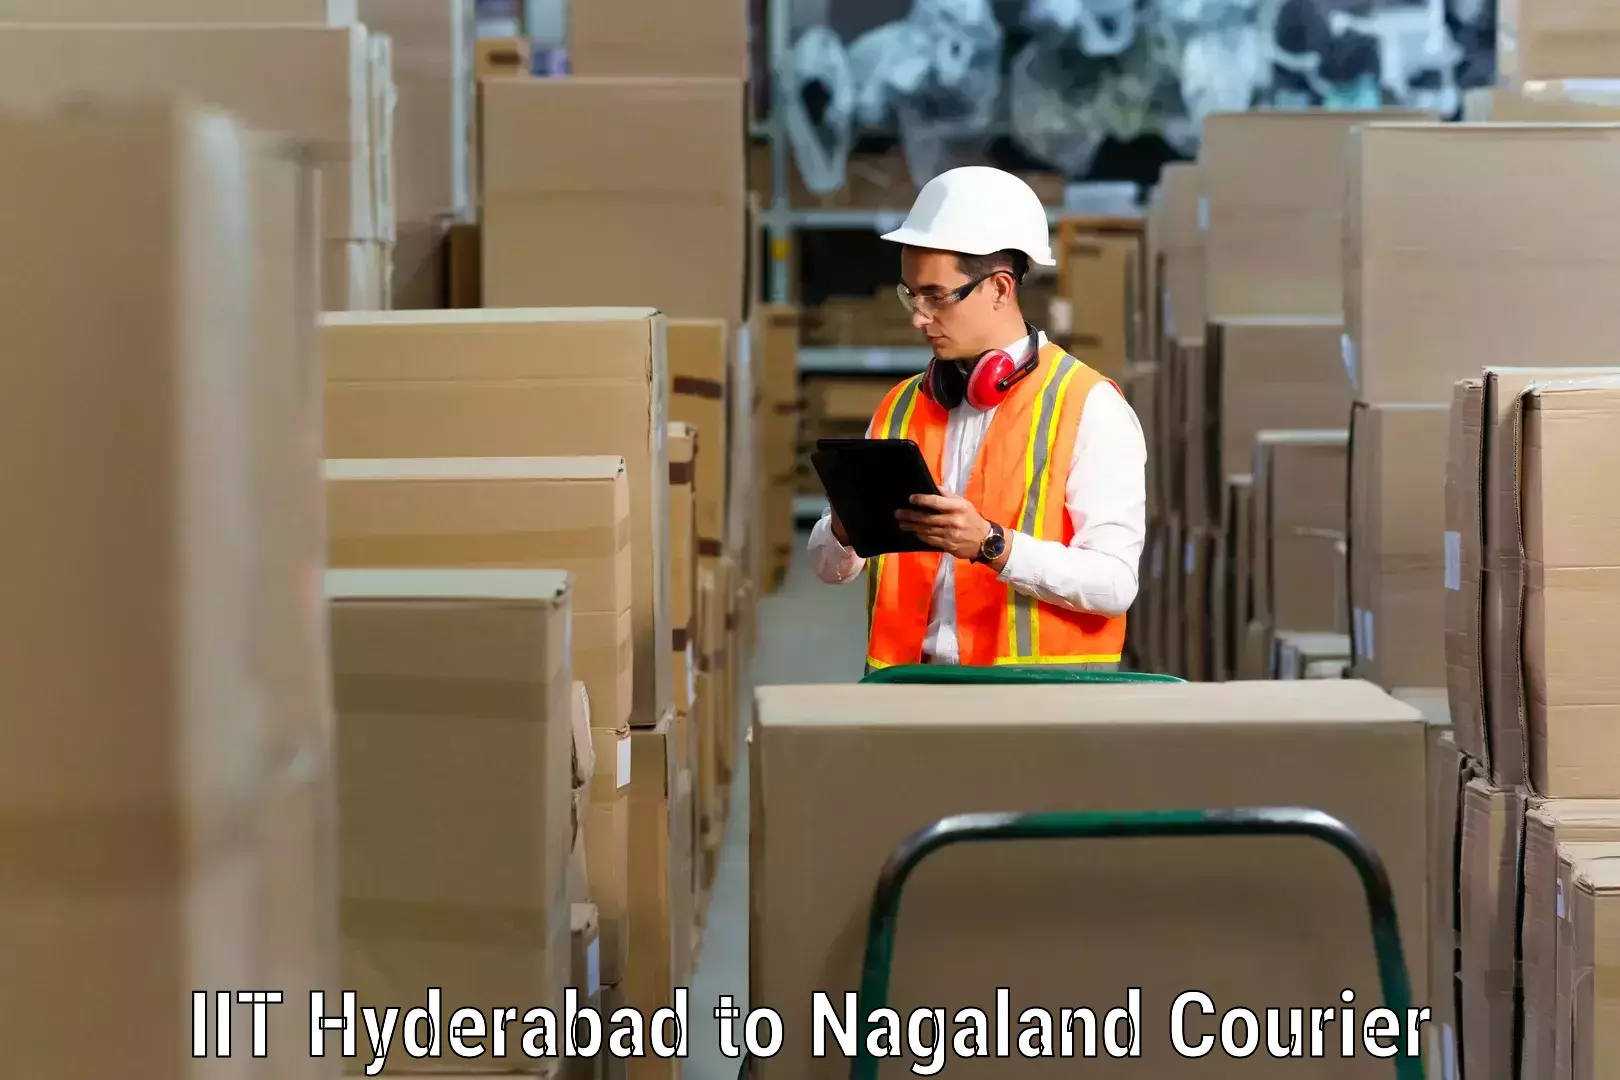 Furniture transport specialists IIT Hyderabad to NIT Nagaland